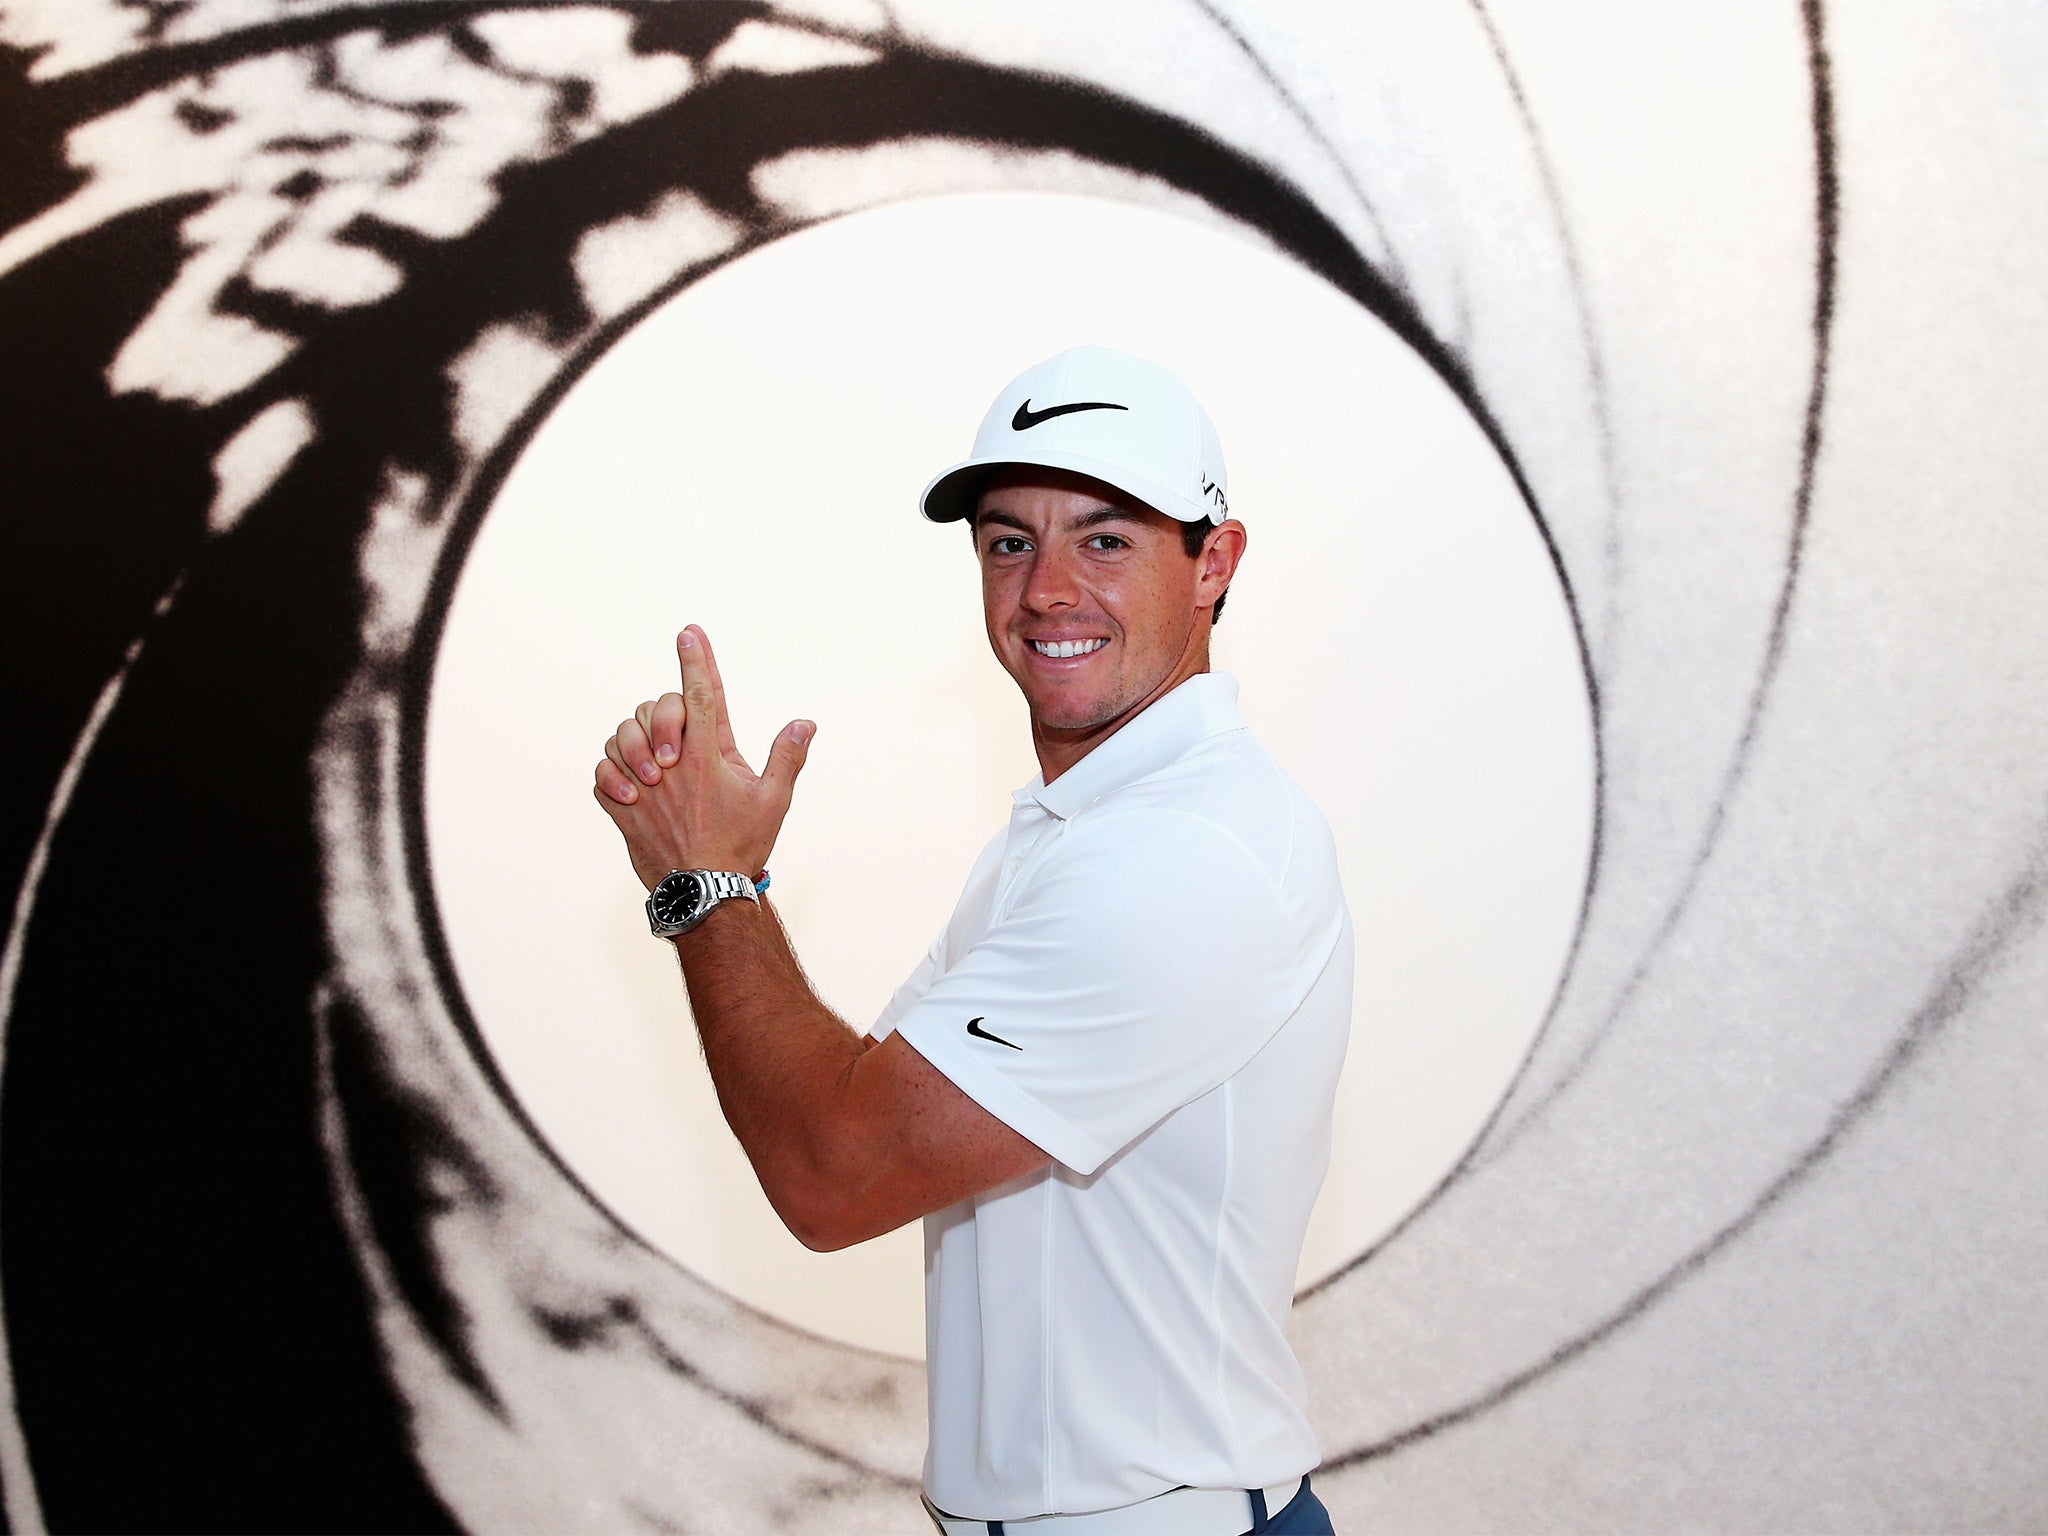 Licence to thrill: Rory McIlroy celebrates returning to No 1 in the world by adopting a familiar pose ahead of the US PGA